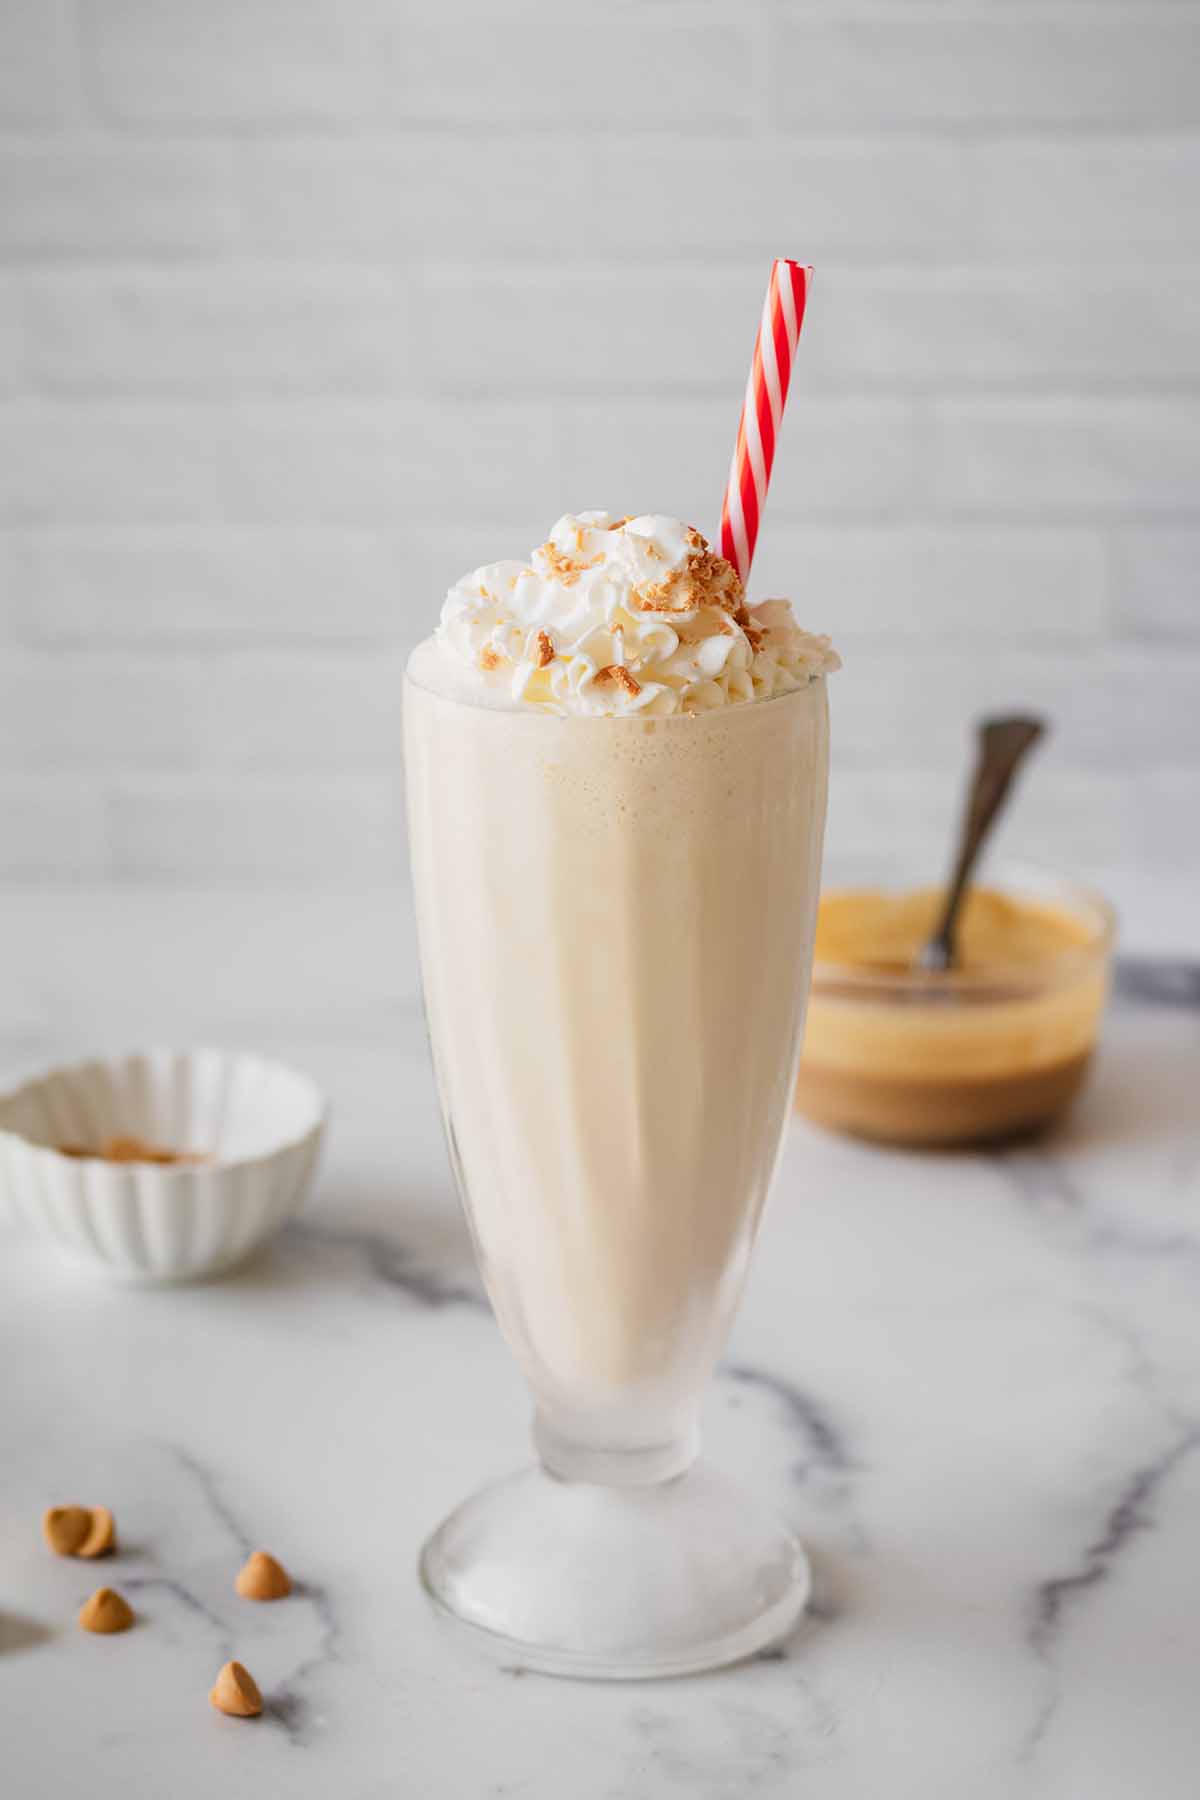 Butterscotch milkshake in a tall glass with whipped cream and a red and white straw